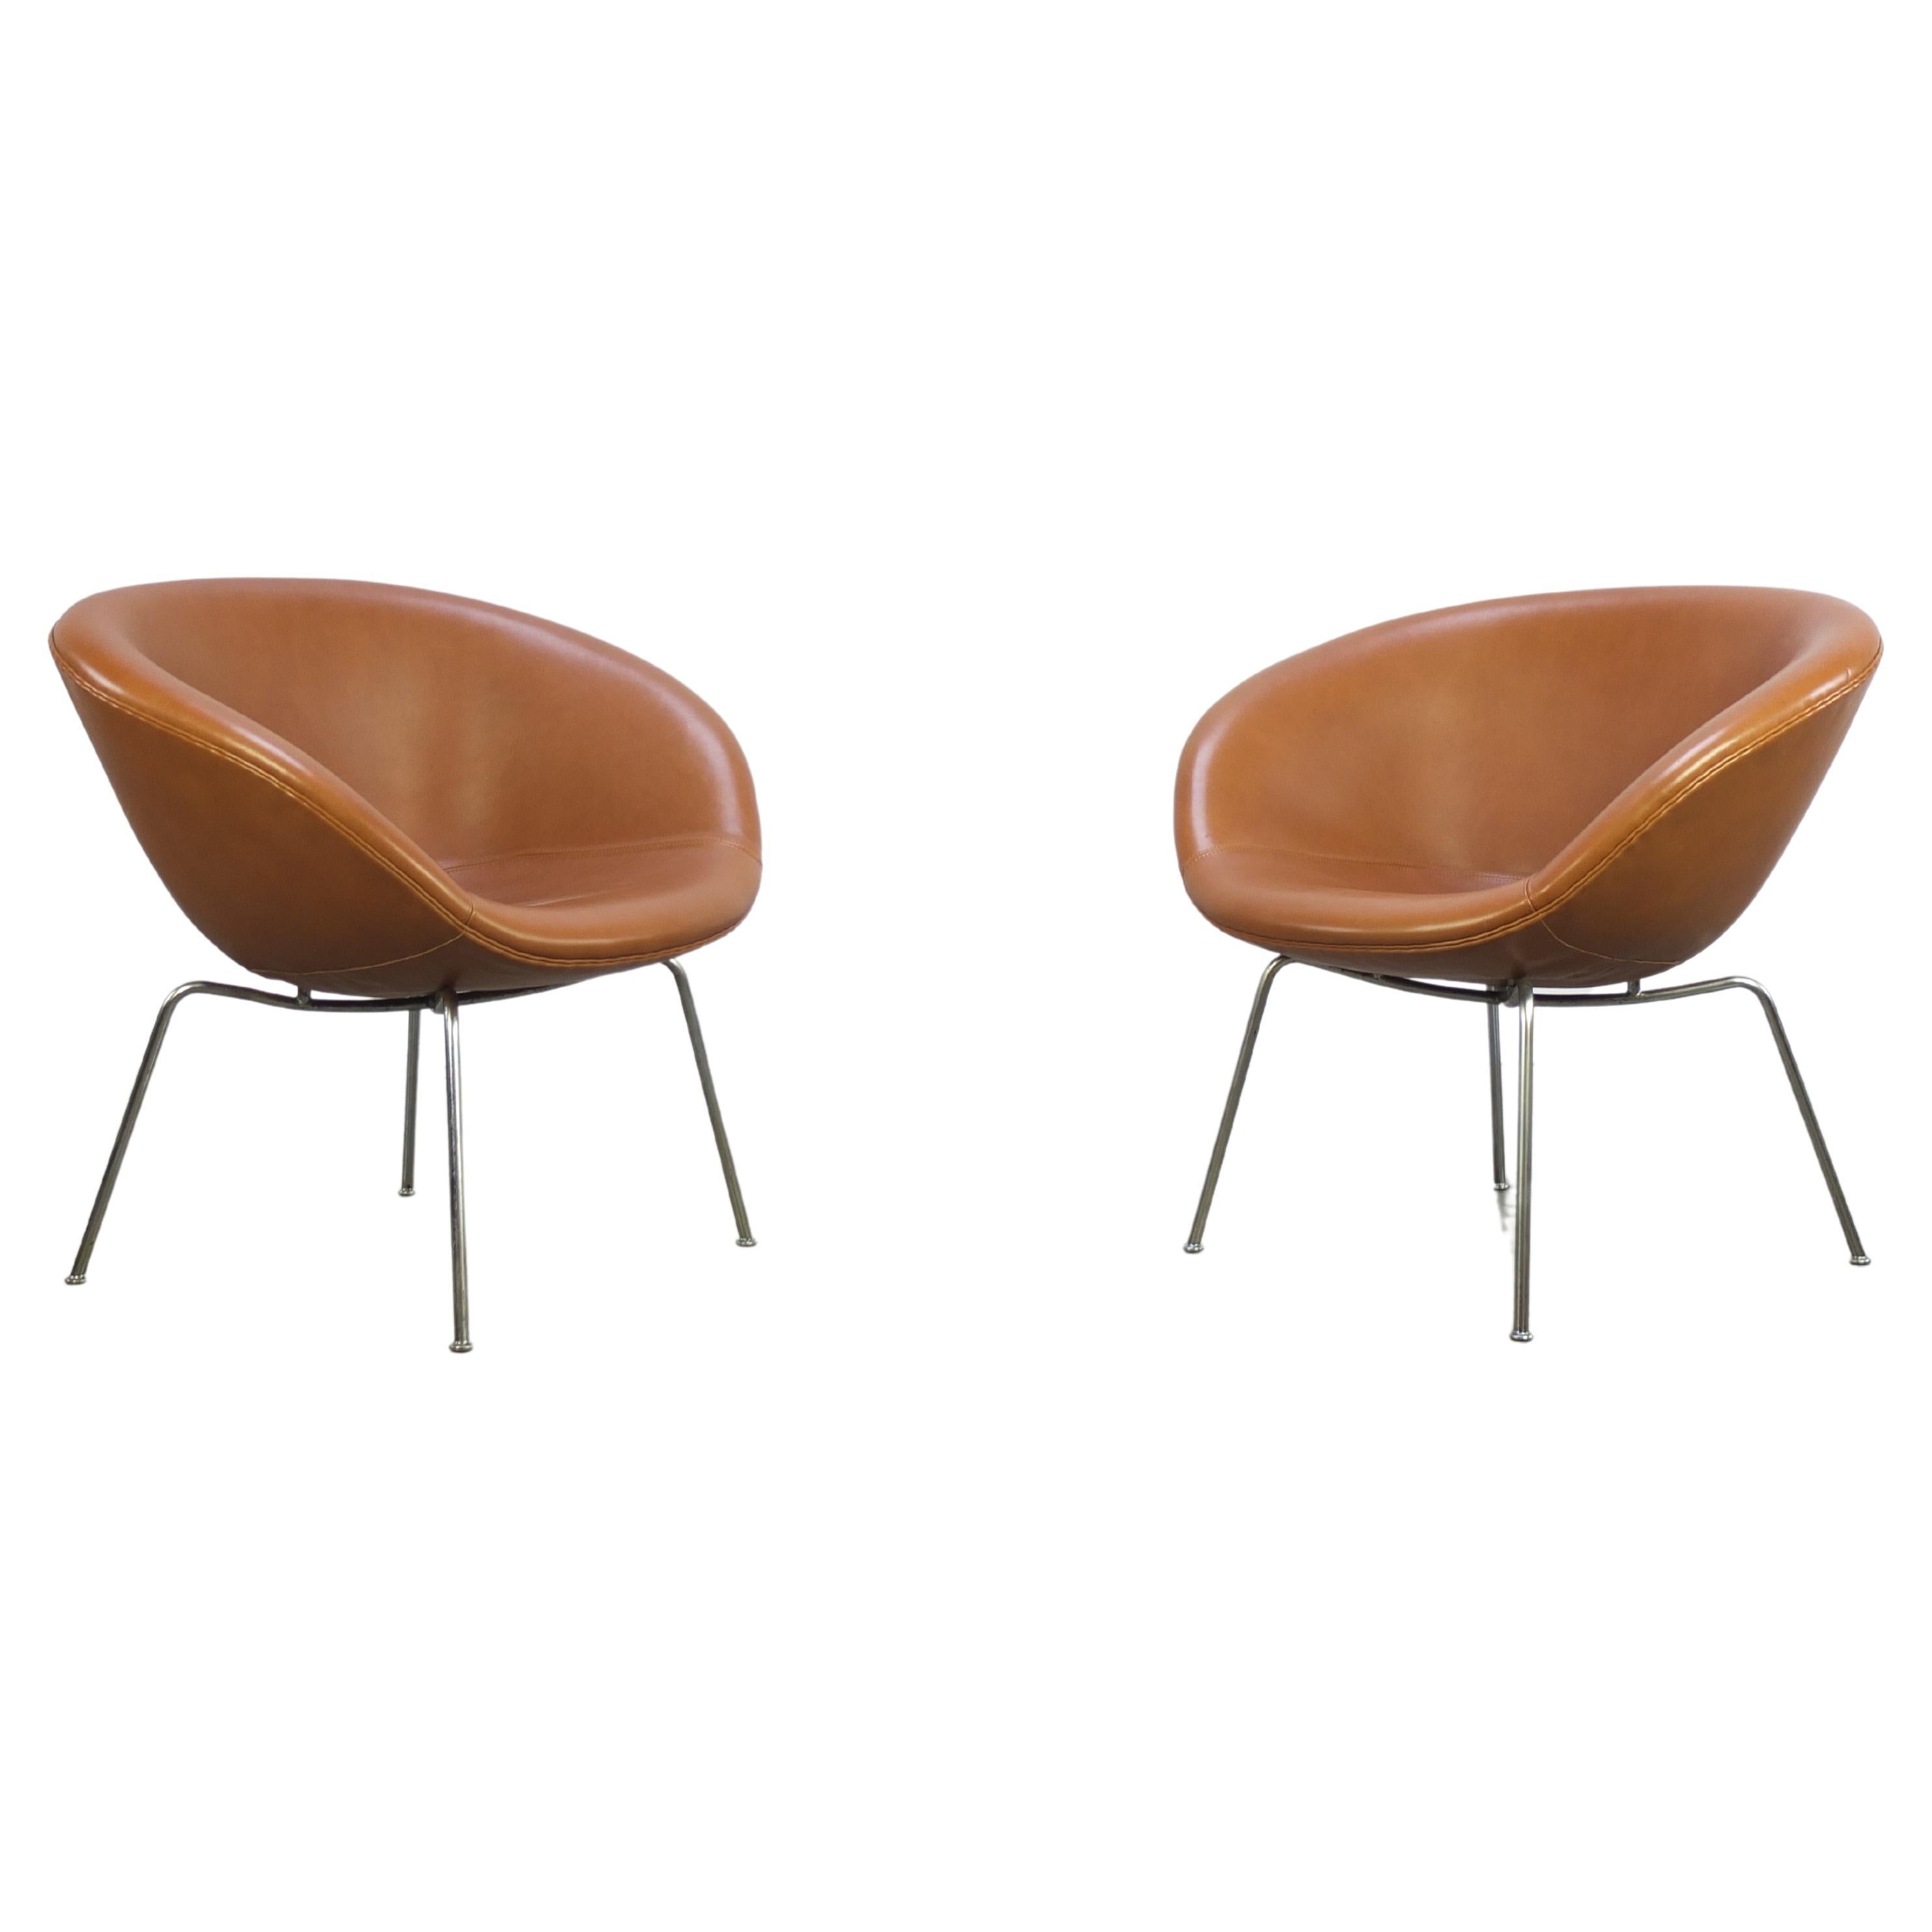 Early Pair of 'Pot' Lounge Chairs by Arne Jacobsen for Fritz Hansen, 1950s